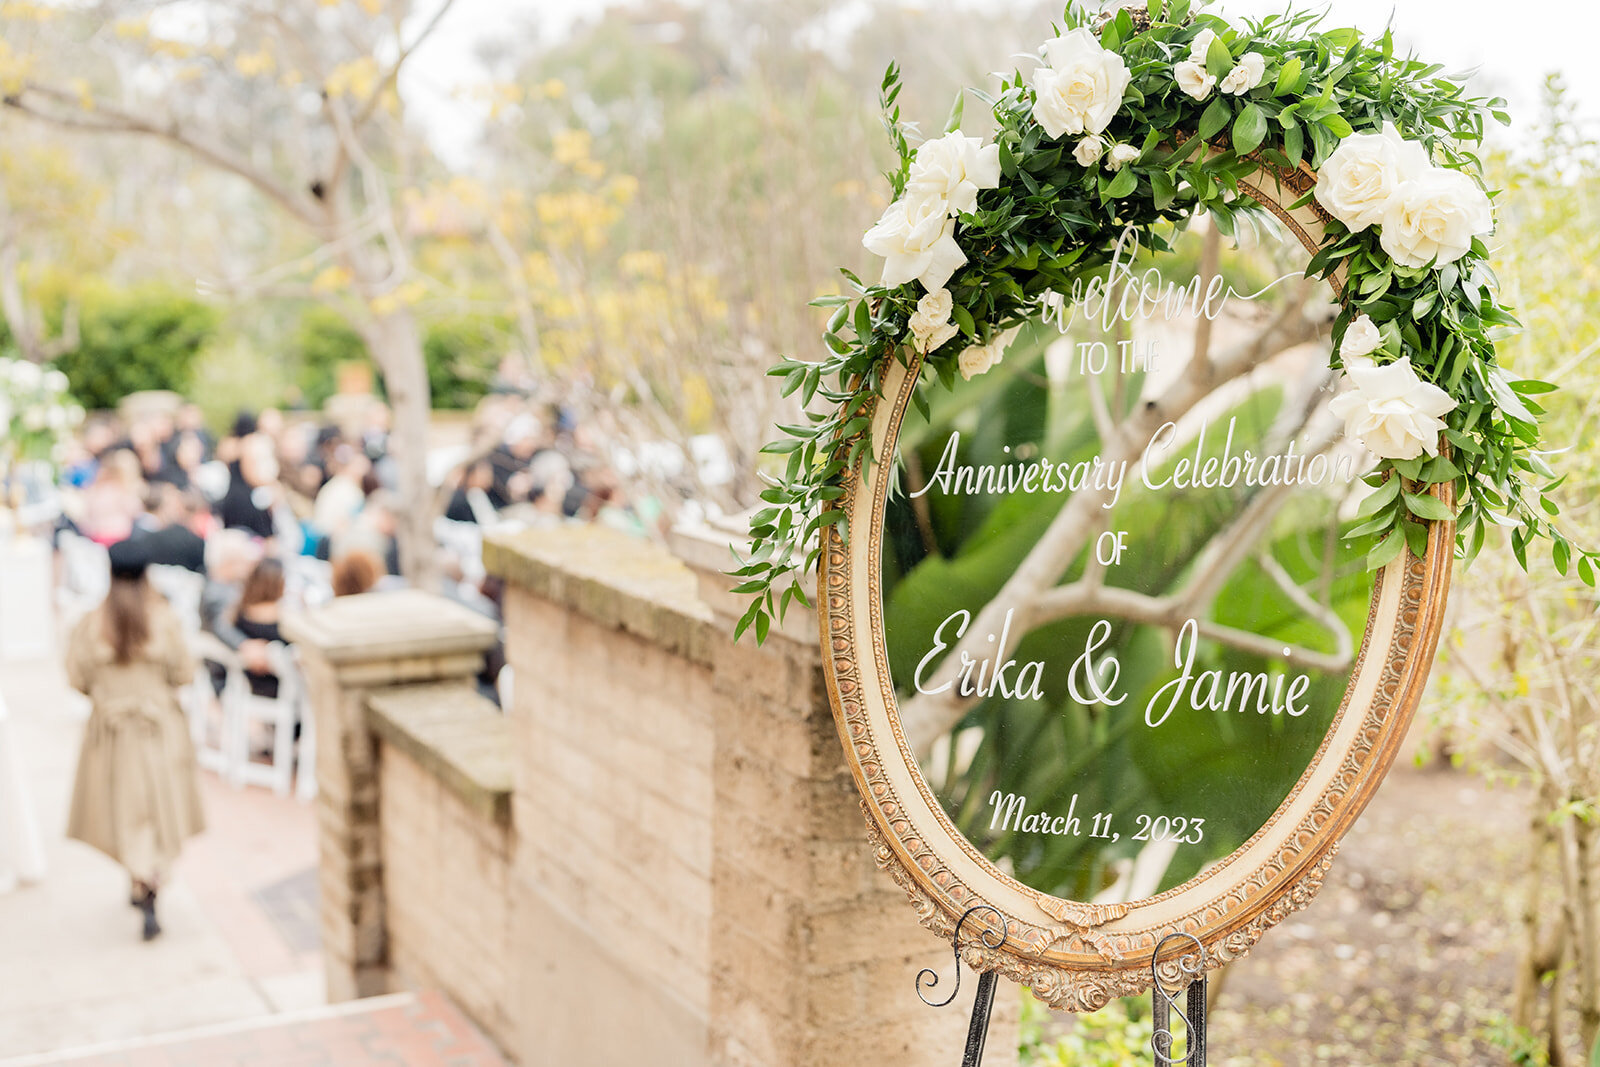 A golden rimmed mirror welcome sign at a wedding ceremony.